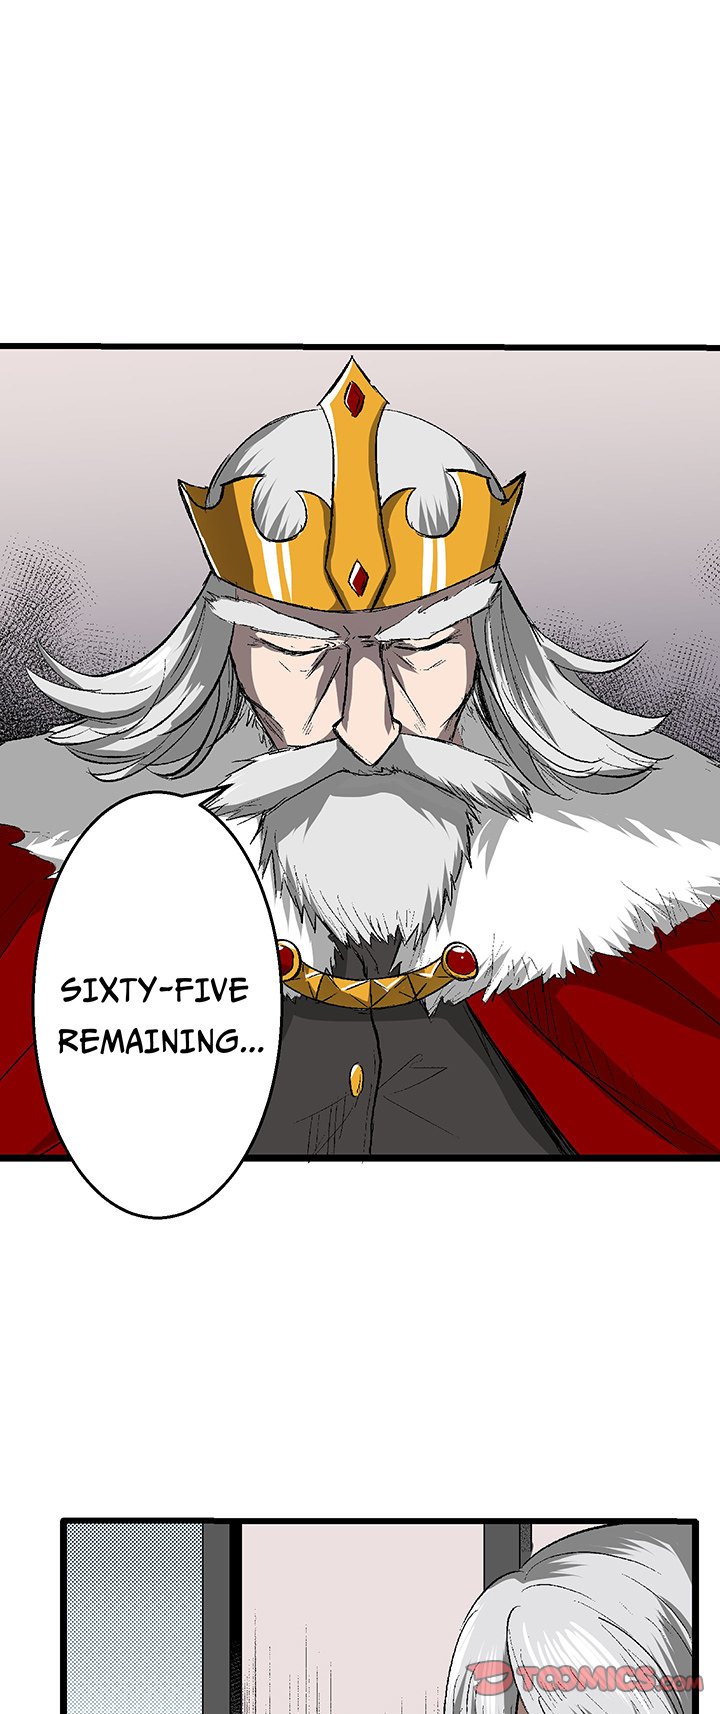 I Reincarnated as a Villain of an RPG, But I Want to Survive Chapter 20 - HolyManga.net